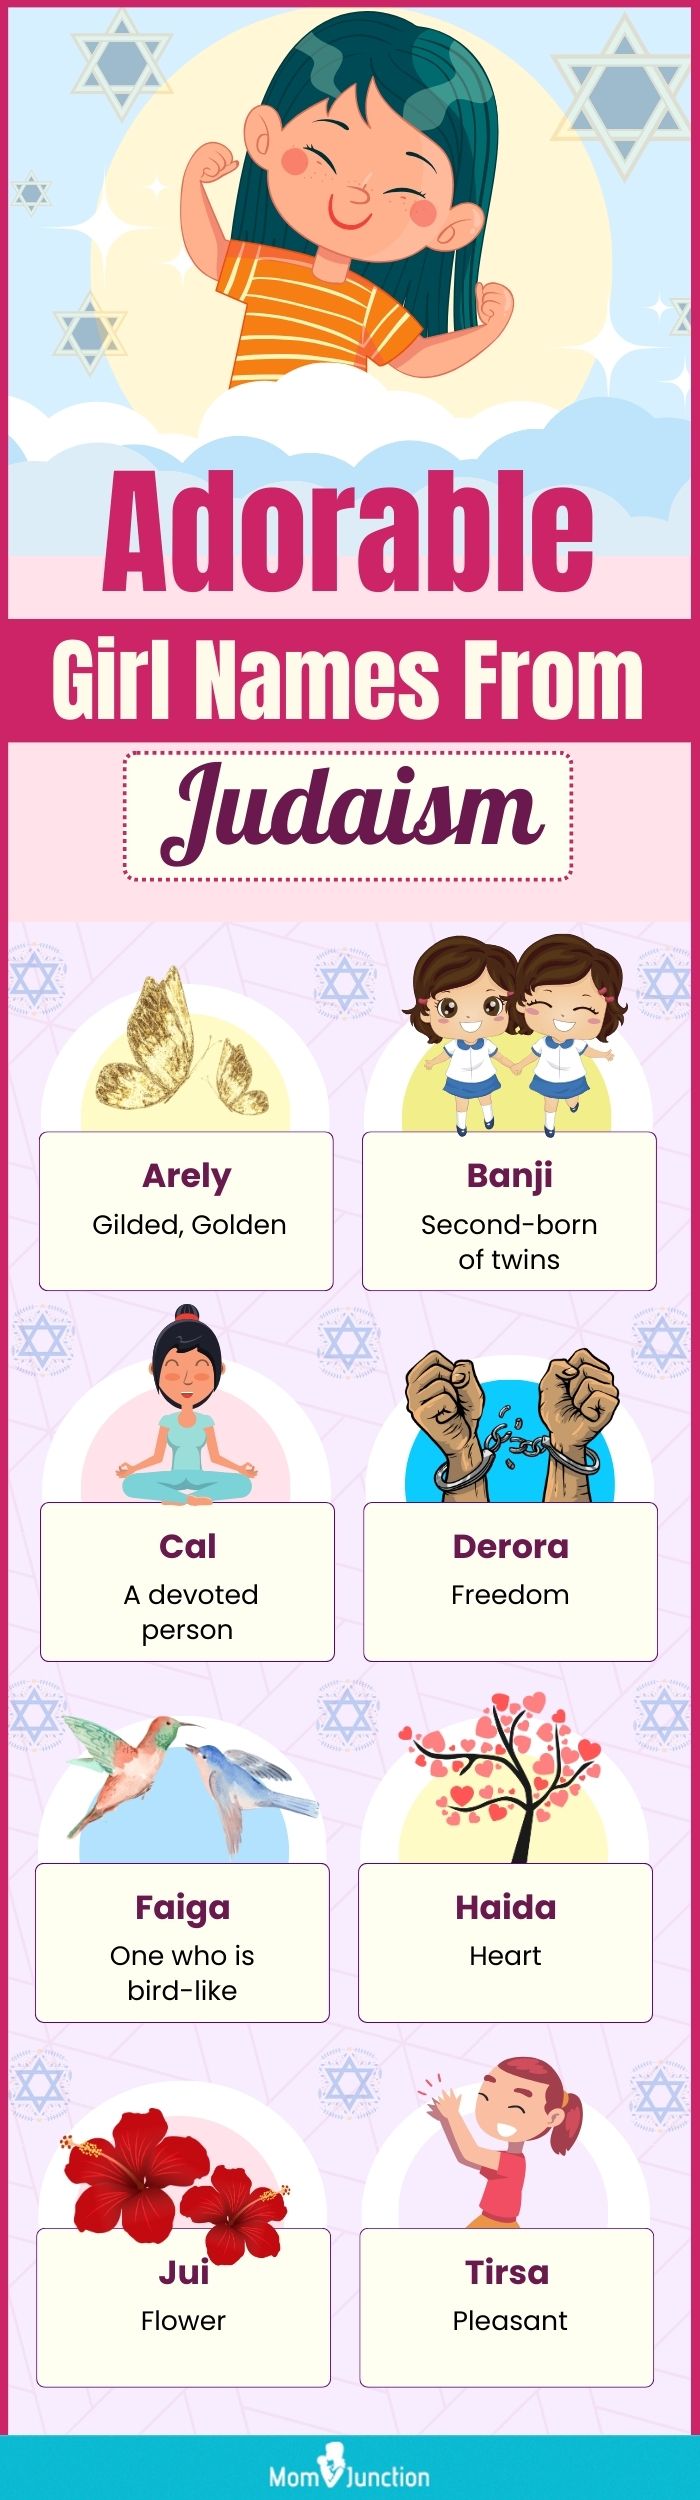 adorable girl names from judaism (infographic)